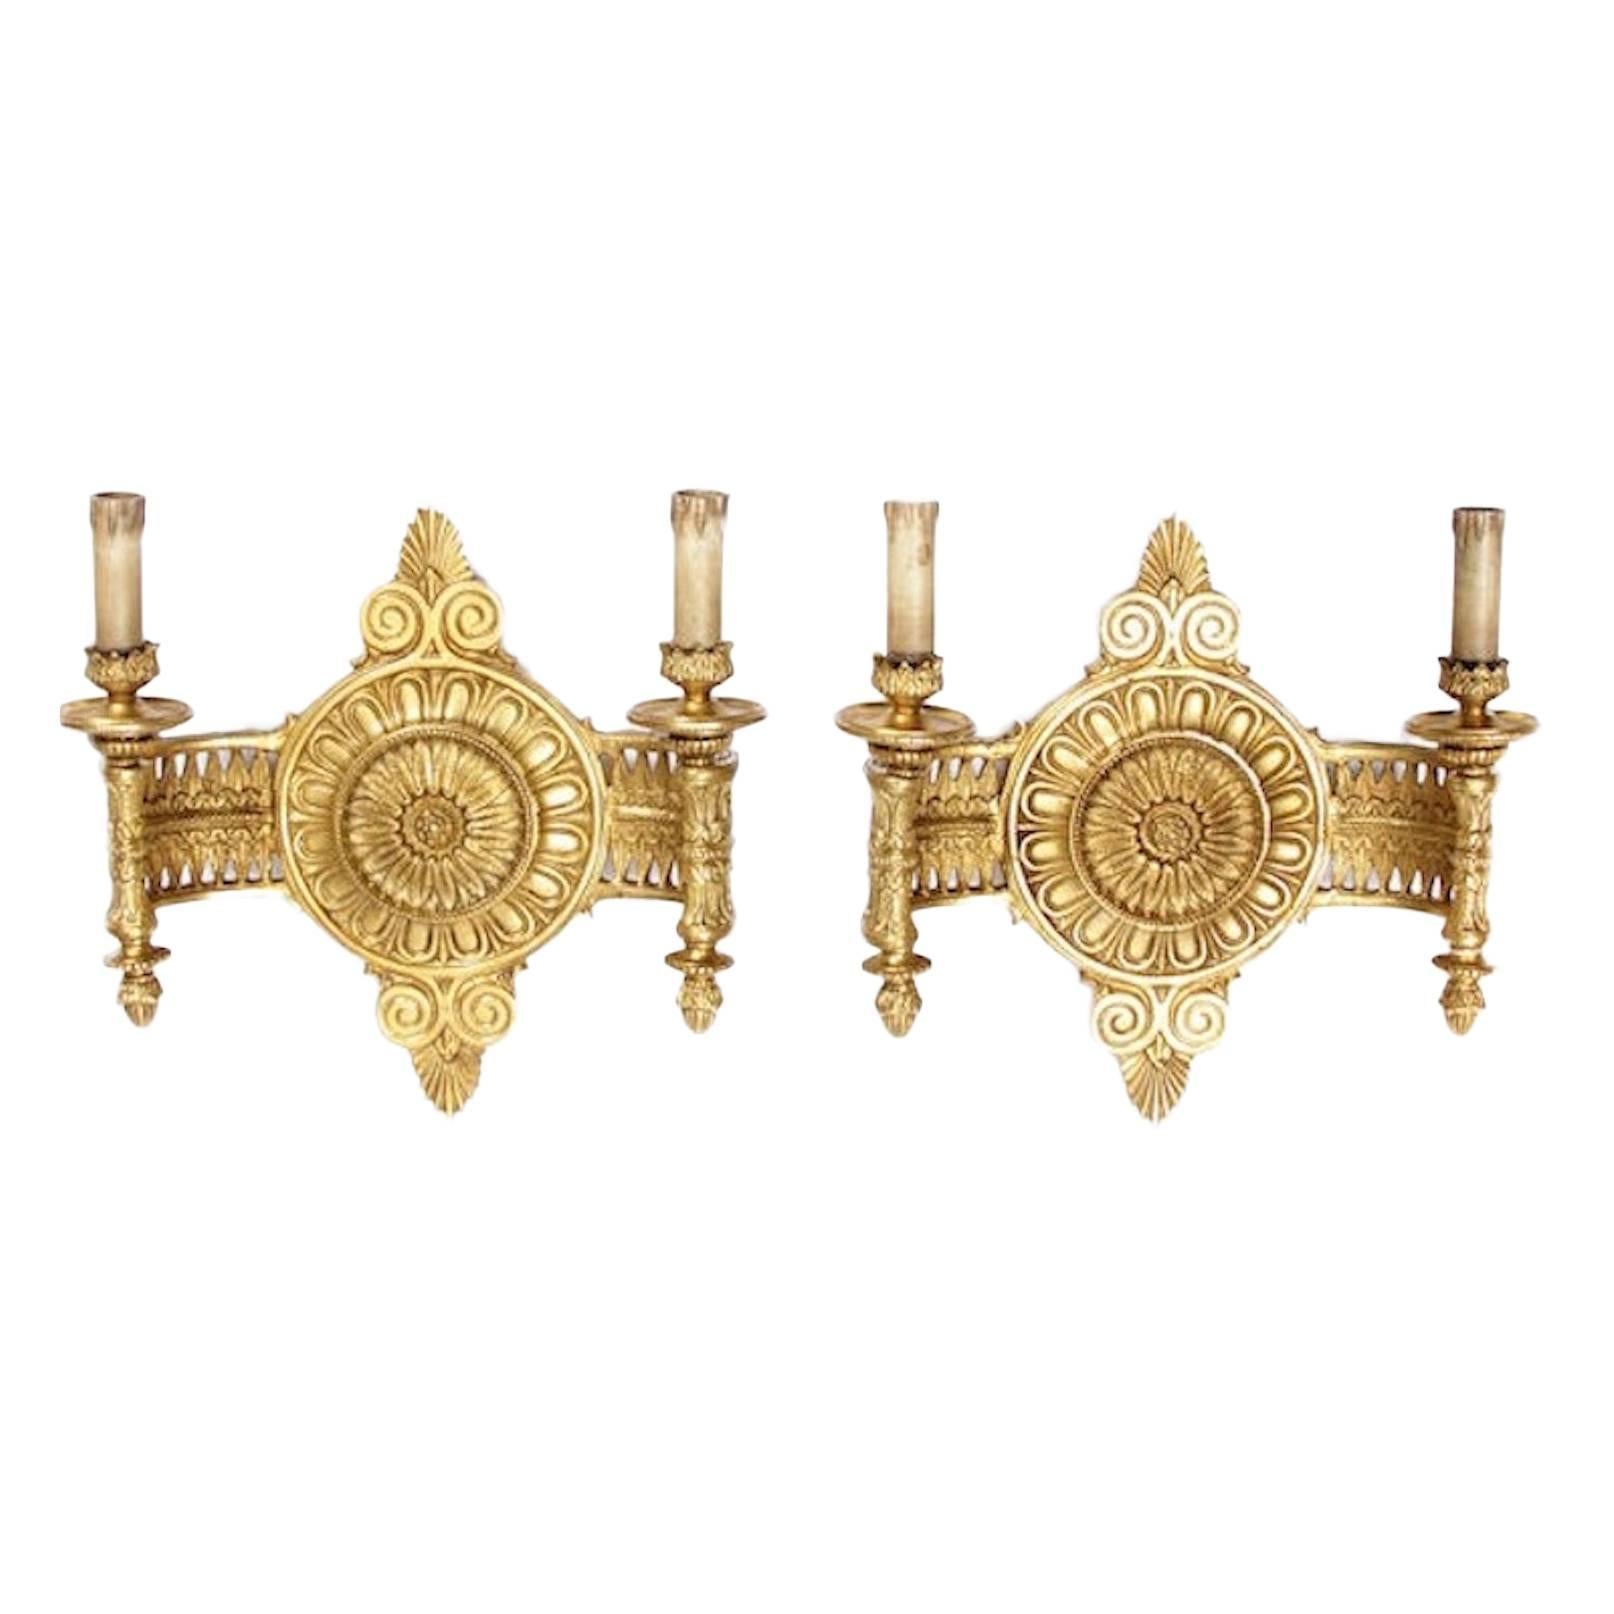 Pair of Louis XVI Style Gilt Bronze Wall Lights For Sale